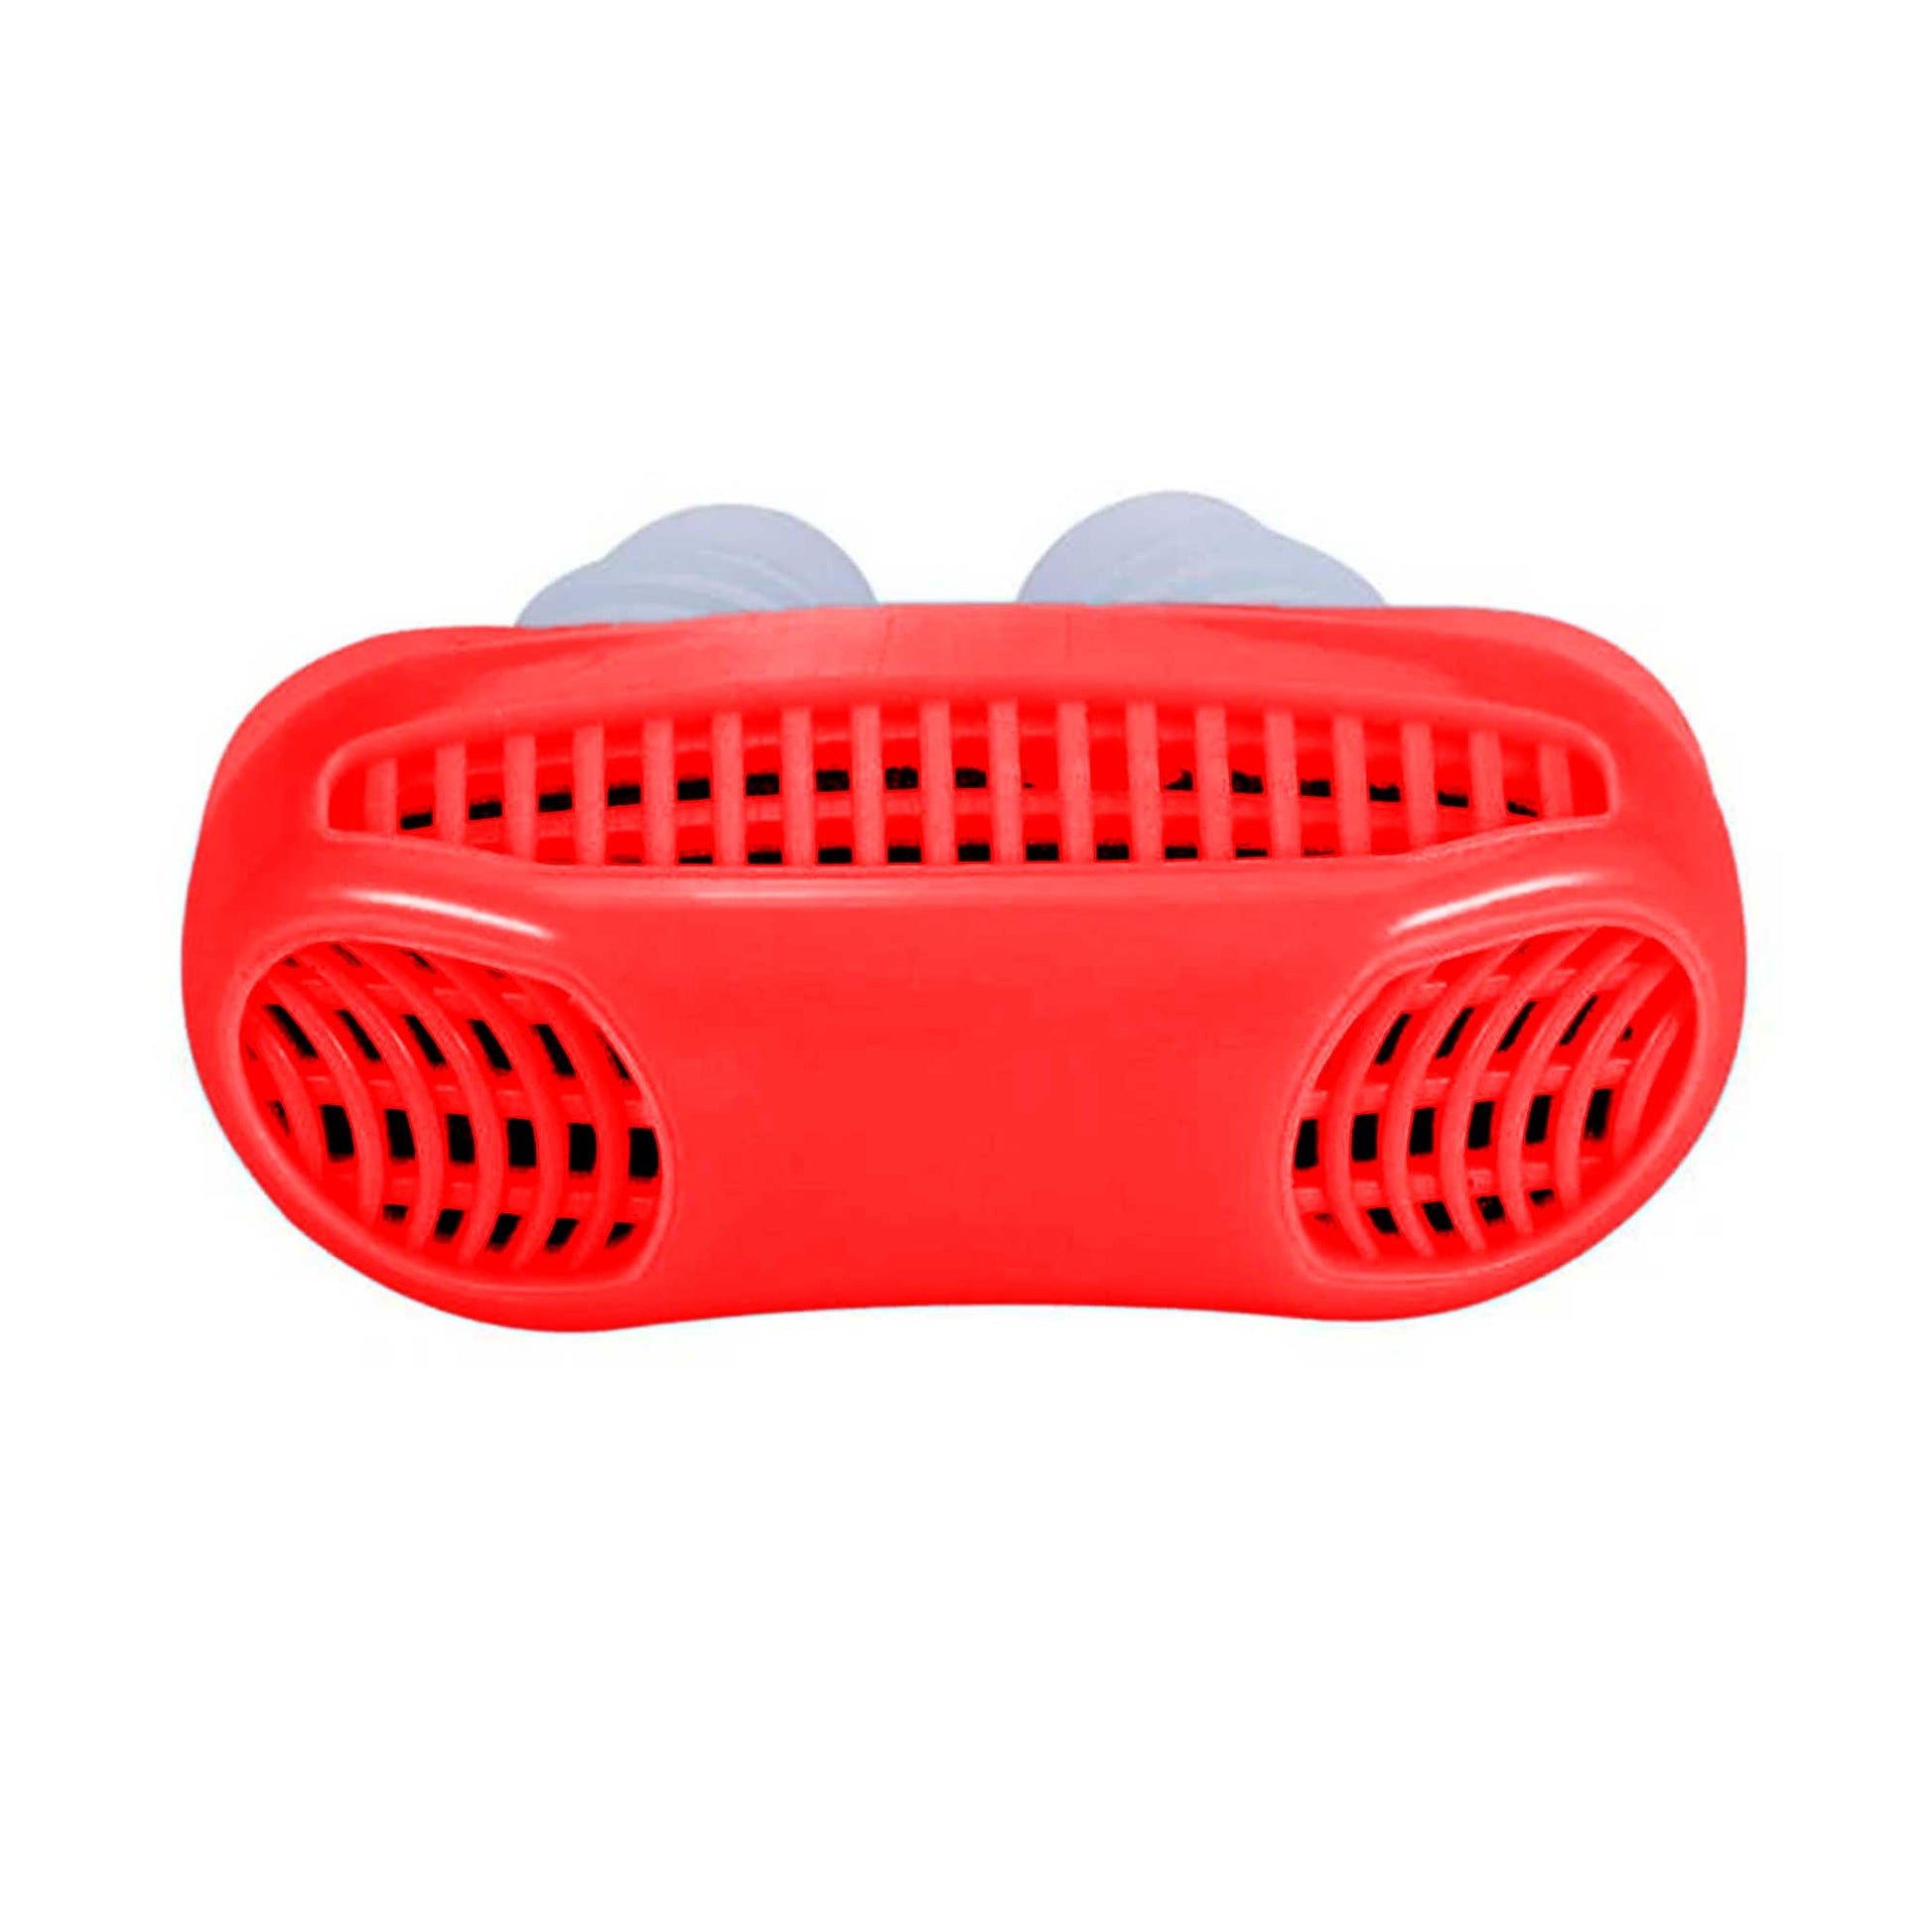 Anti Snoring Aid - 2 in 1 Snore and Air Purifier Filter Nose Clip Breathing Device